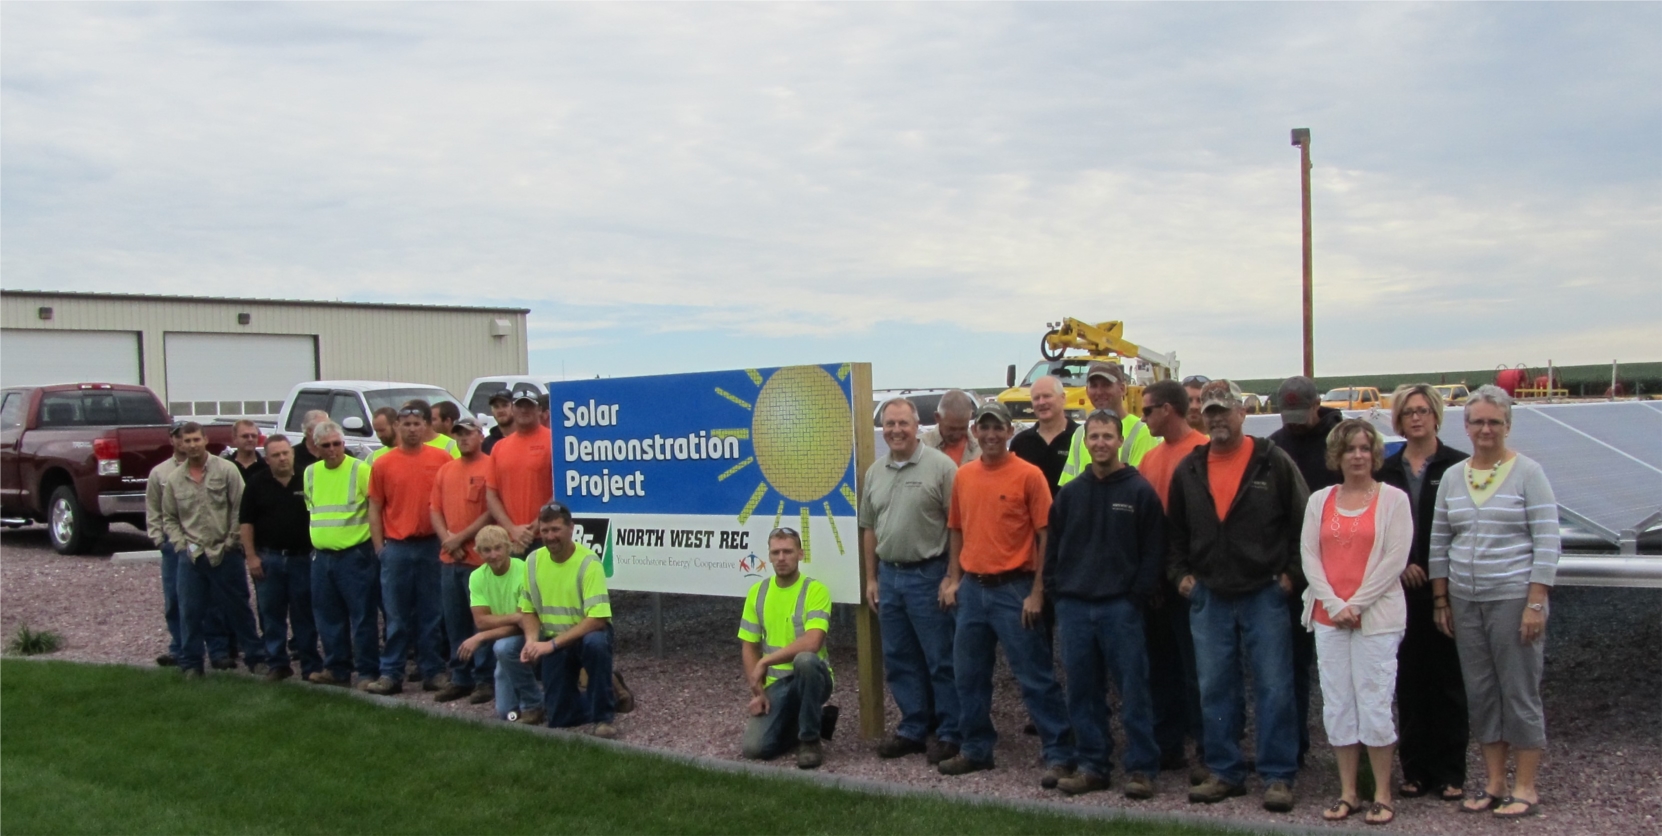 Employees by solar demonstration project